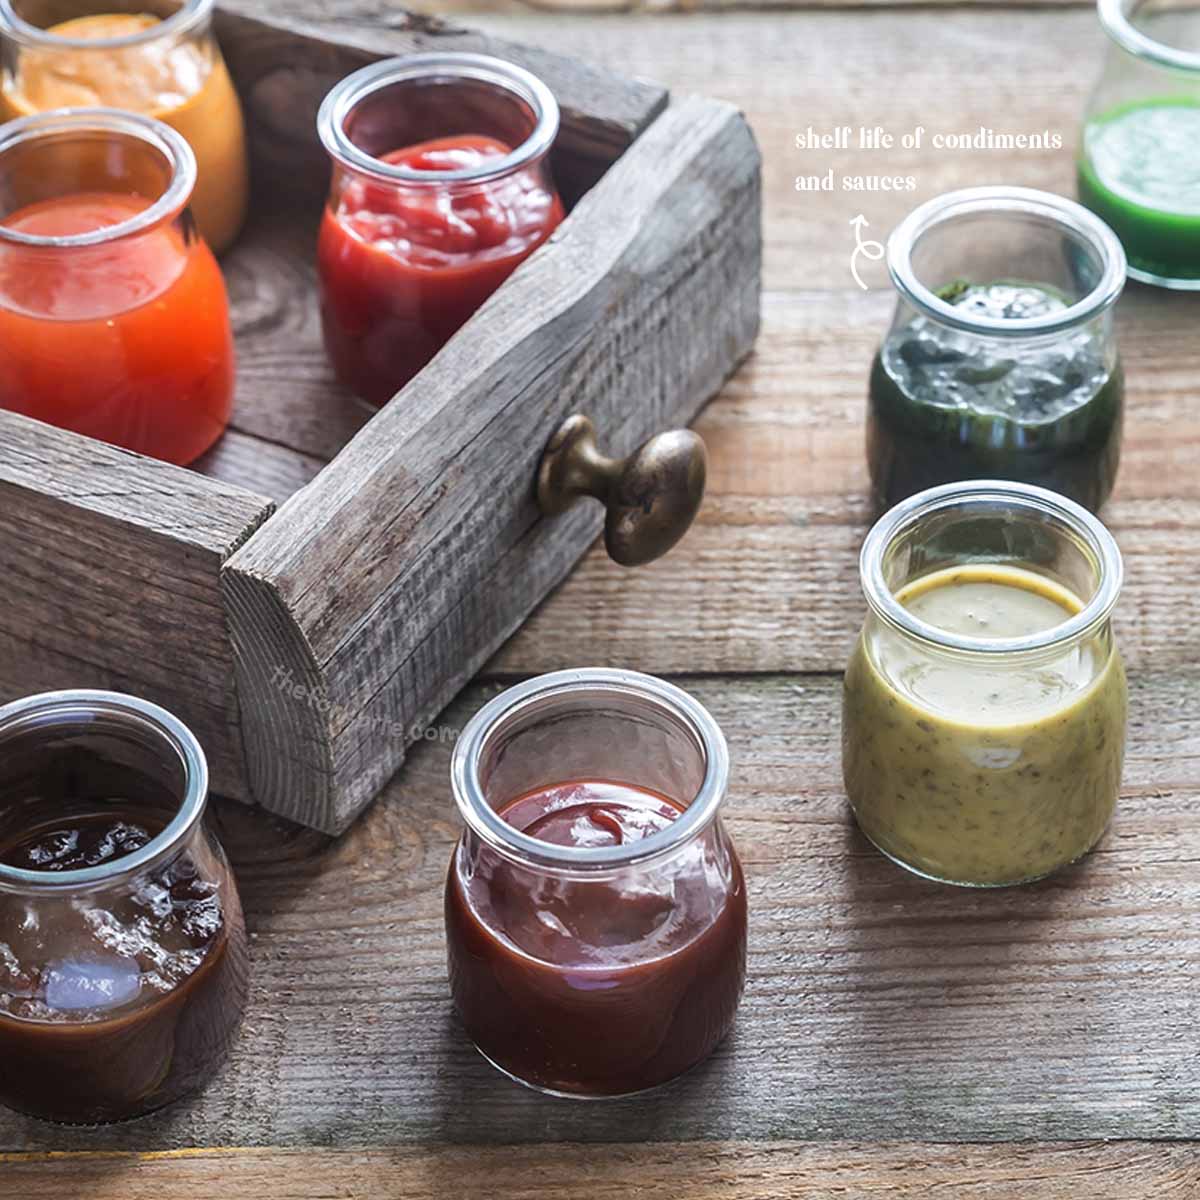 Condiments and sauces can take even the blandest tasting dishes and inject them with a flavor hit to liven them up